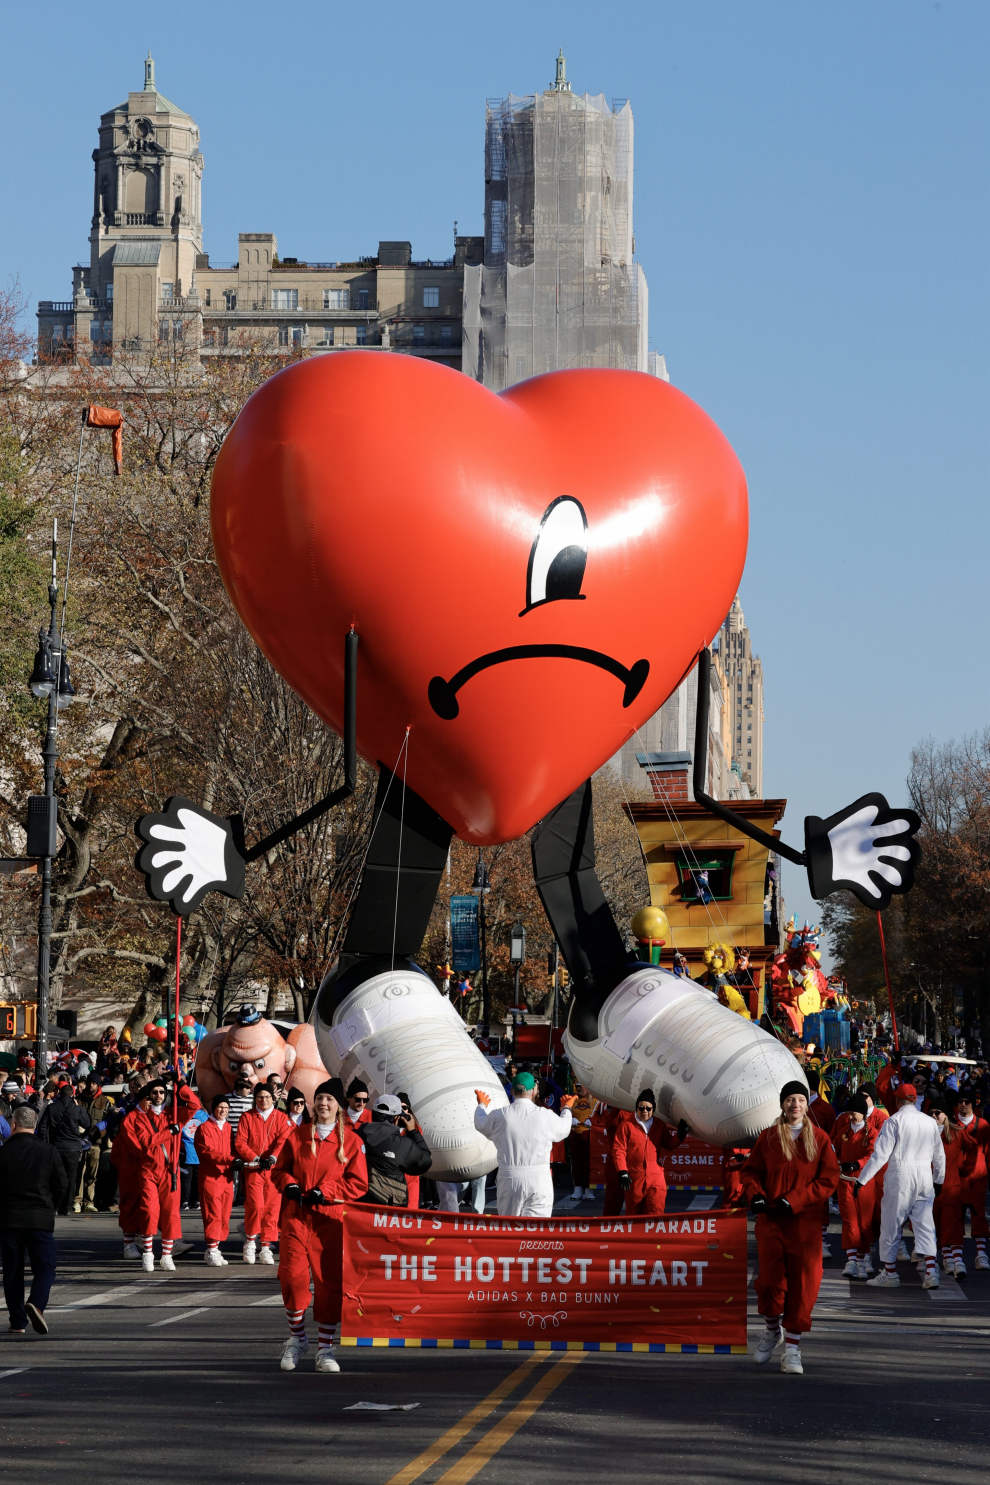 New York (United States), 24/11/2022.- The Smurf balloon and the Stuart the Minion (back) balloon float down Central Park West during the Macy's Annual Thanksgiving Day Parade in New York City, New York, USA, 24 November 2022. The annual parade, which began in 1924, features giant balloons of characters from popular culture floating above the streets of Manhattan. (Estados Unidos, Nueva York) EFE/EPA/JASON SZENES
 USA MACYS THANKSGIVING PARADE